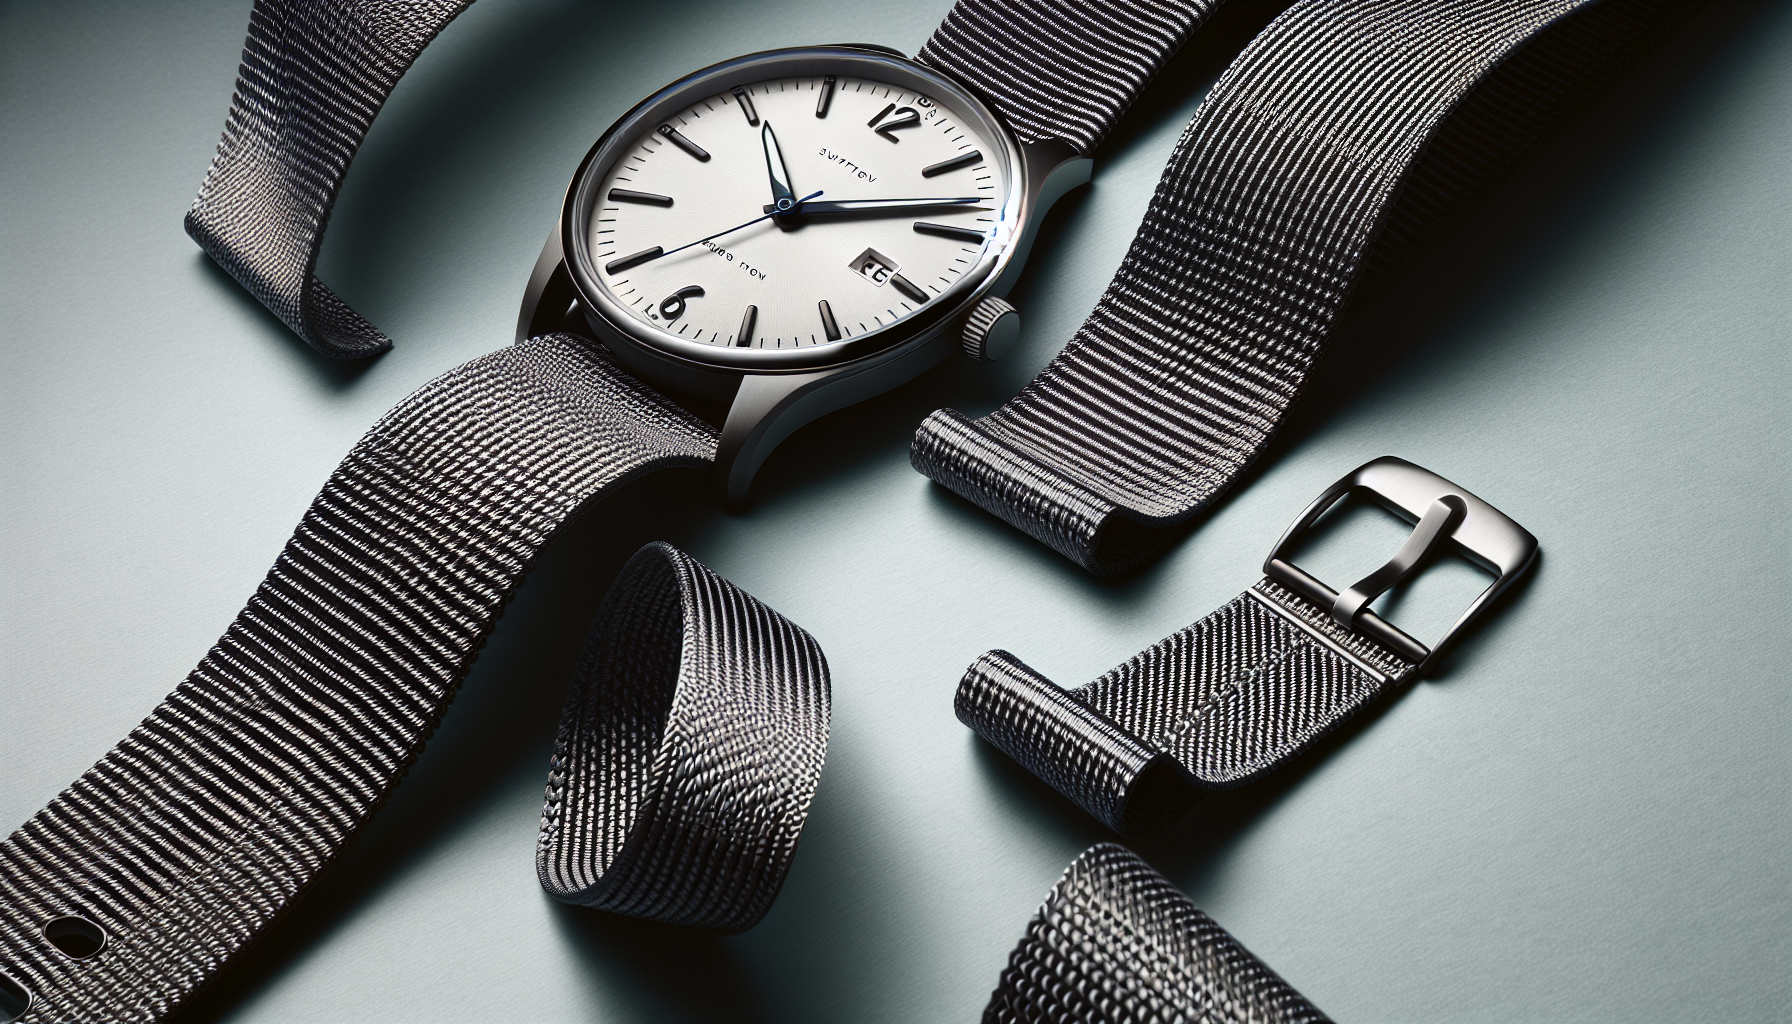 Nylon watch band paired with popular watch brand